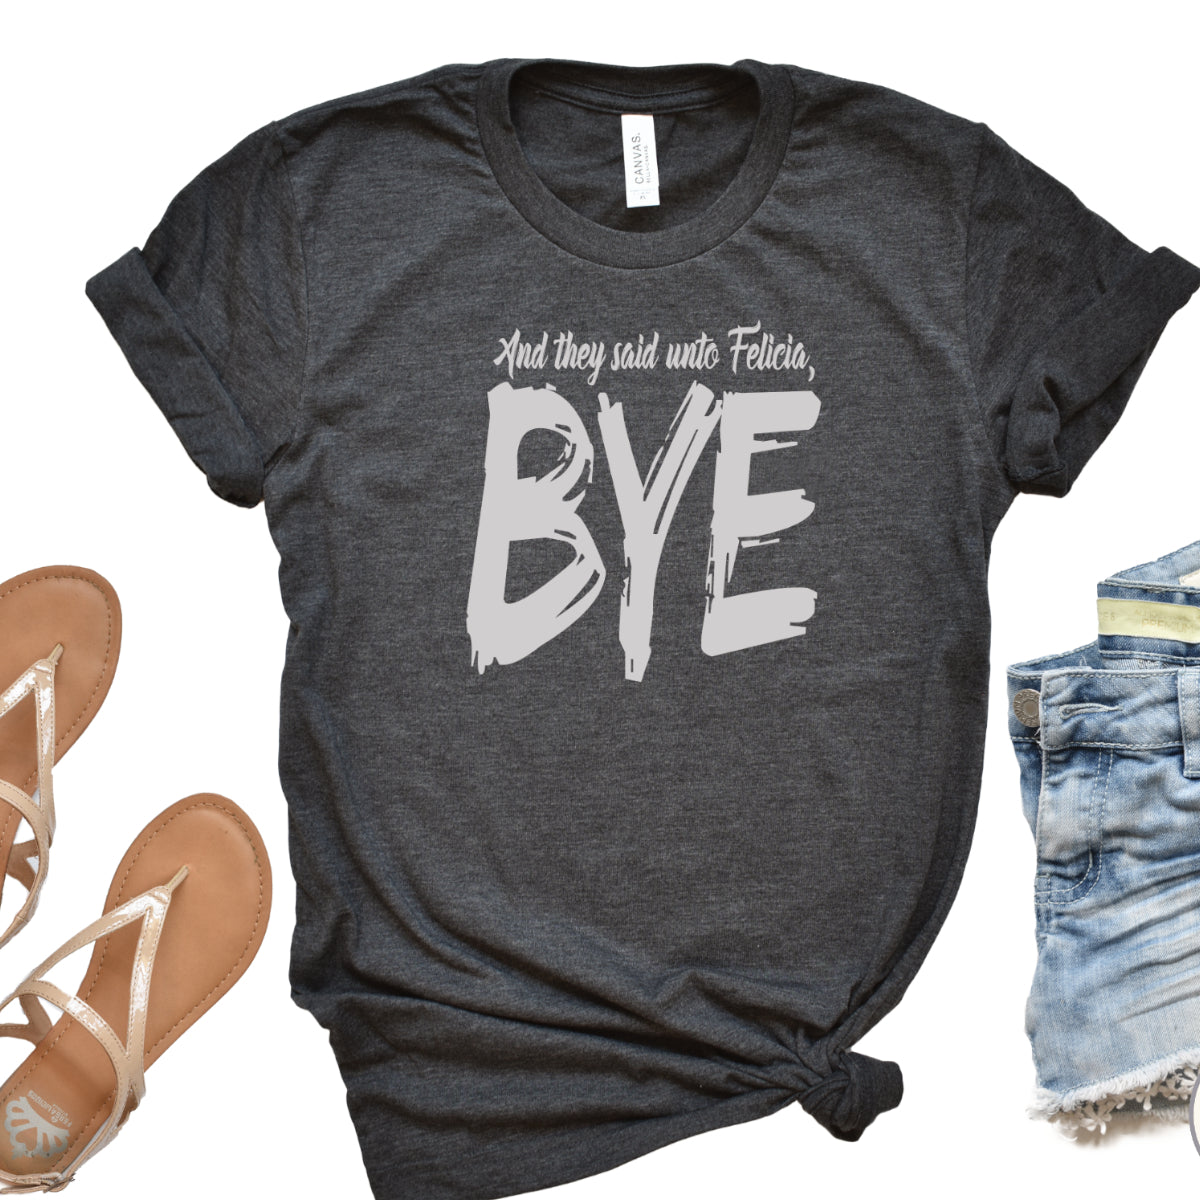 Bye Felicia - Relaxed fit Tee